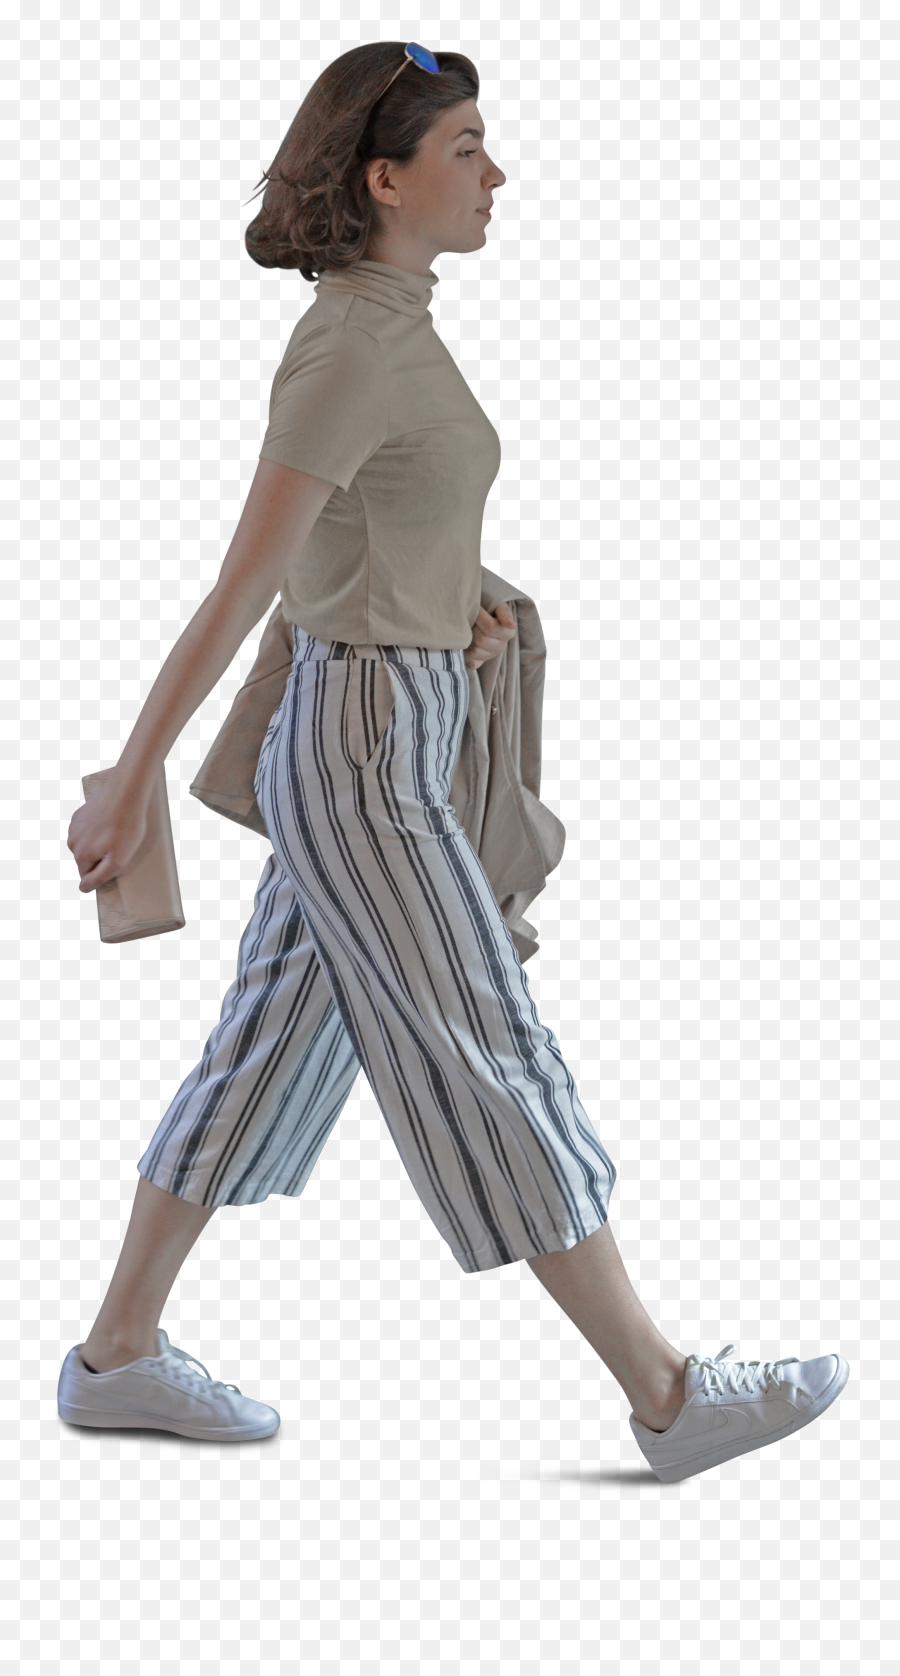 Shopping People Png In 2020 Striped Fashion Pinstripe